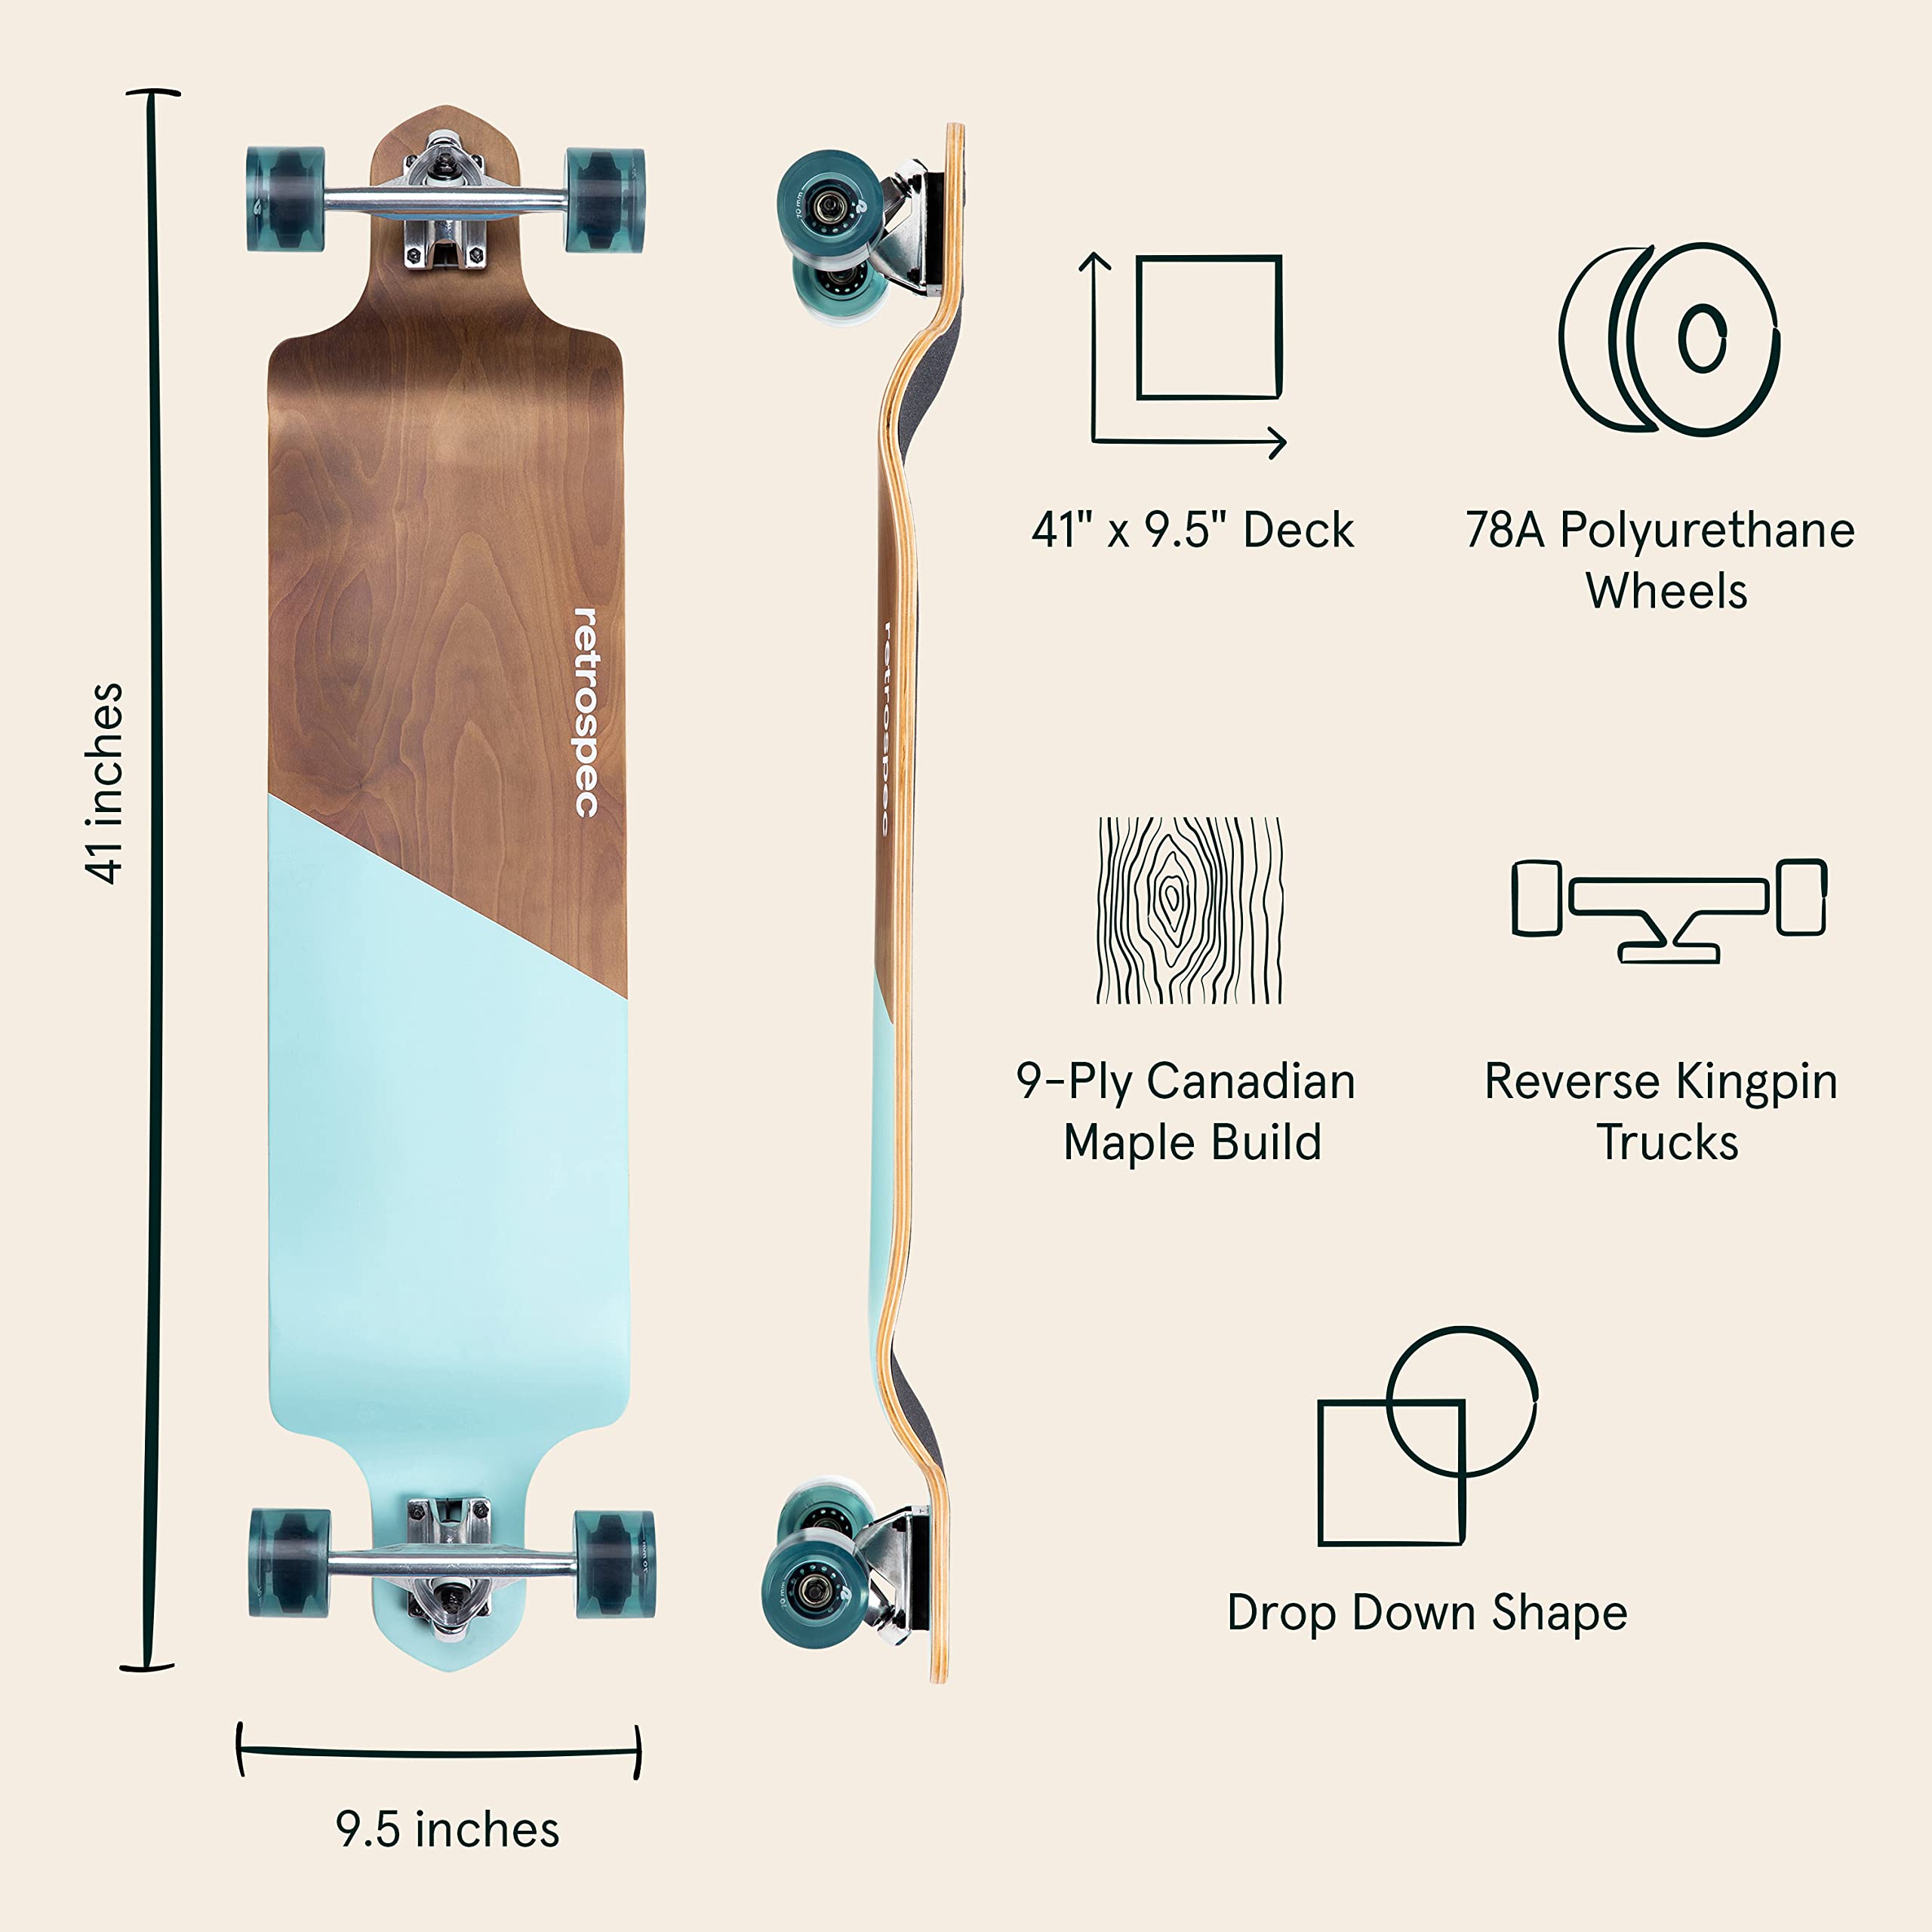 Retrospec Tidal 41-inch Drop-Down Longboard Skateboard Complete 9-Ply Canadian Maple Wood Build Cruiser for Commuting, Cruising, Carving & Downhill Riding